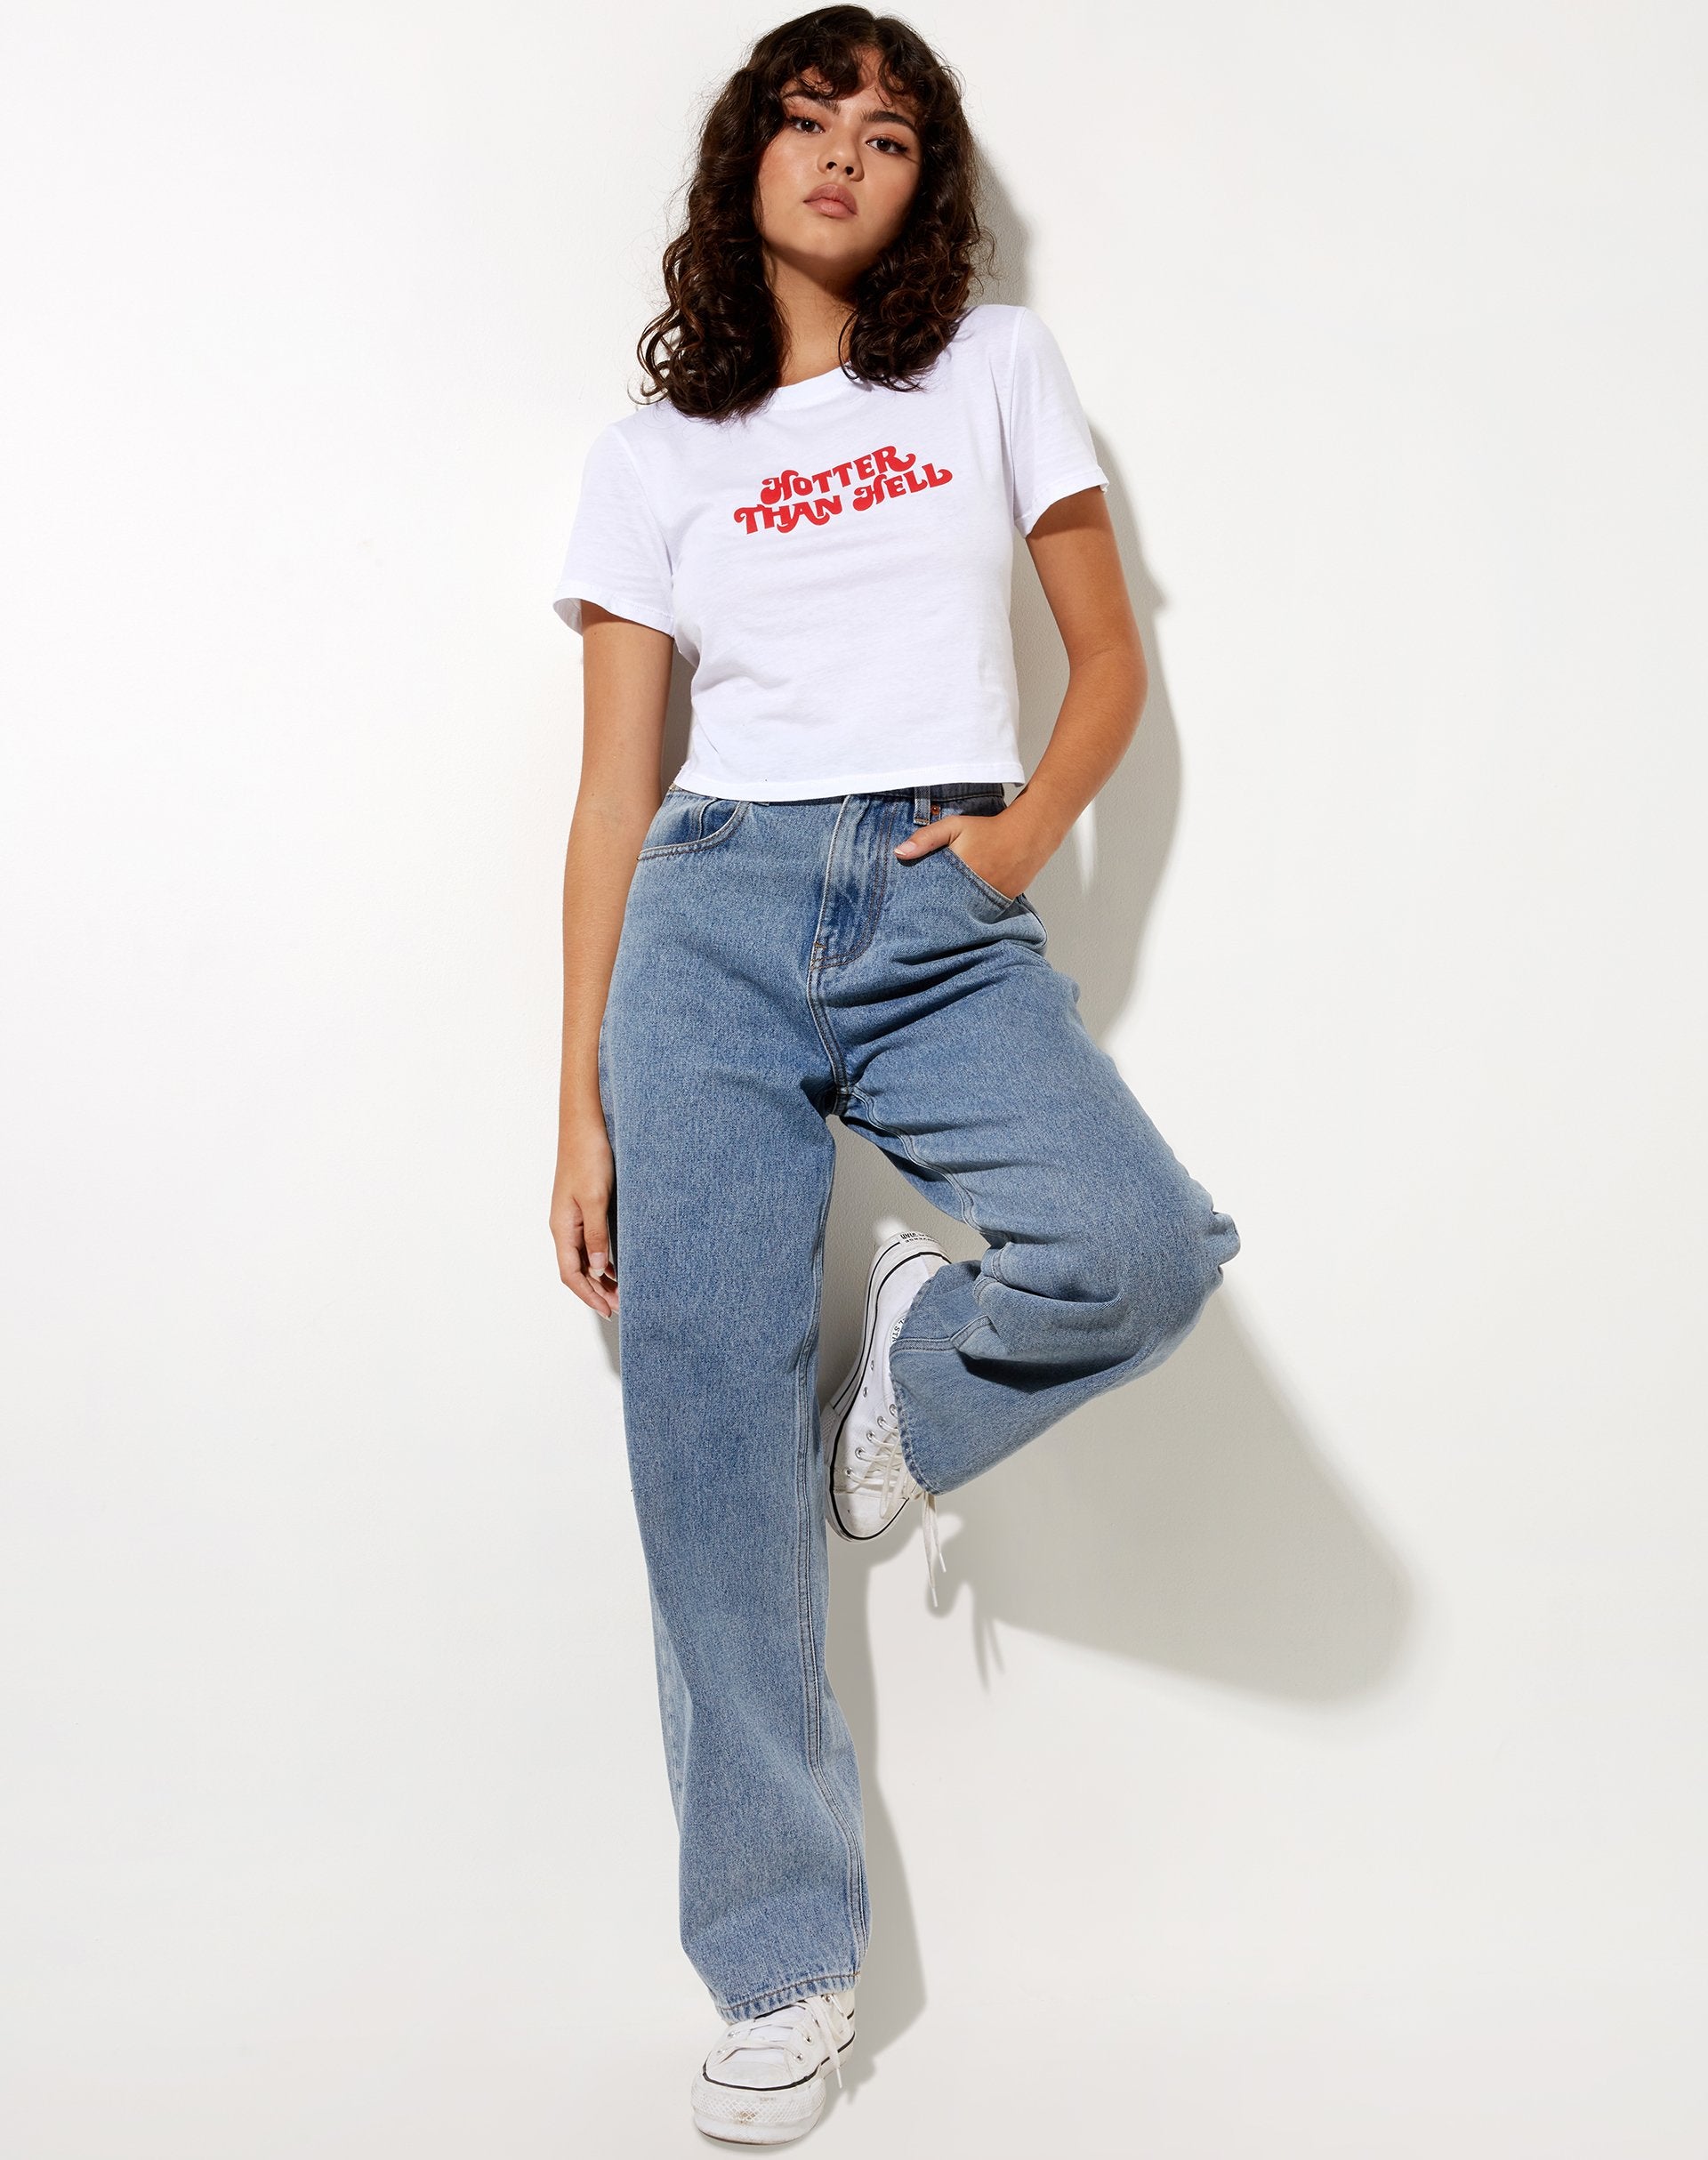 Image of Shrunk Tee in White Hotter Than Hell